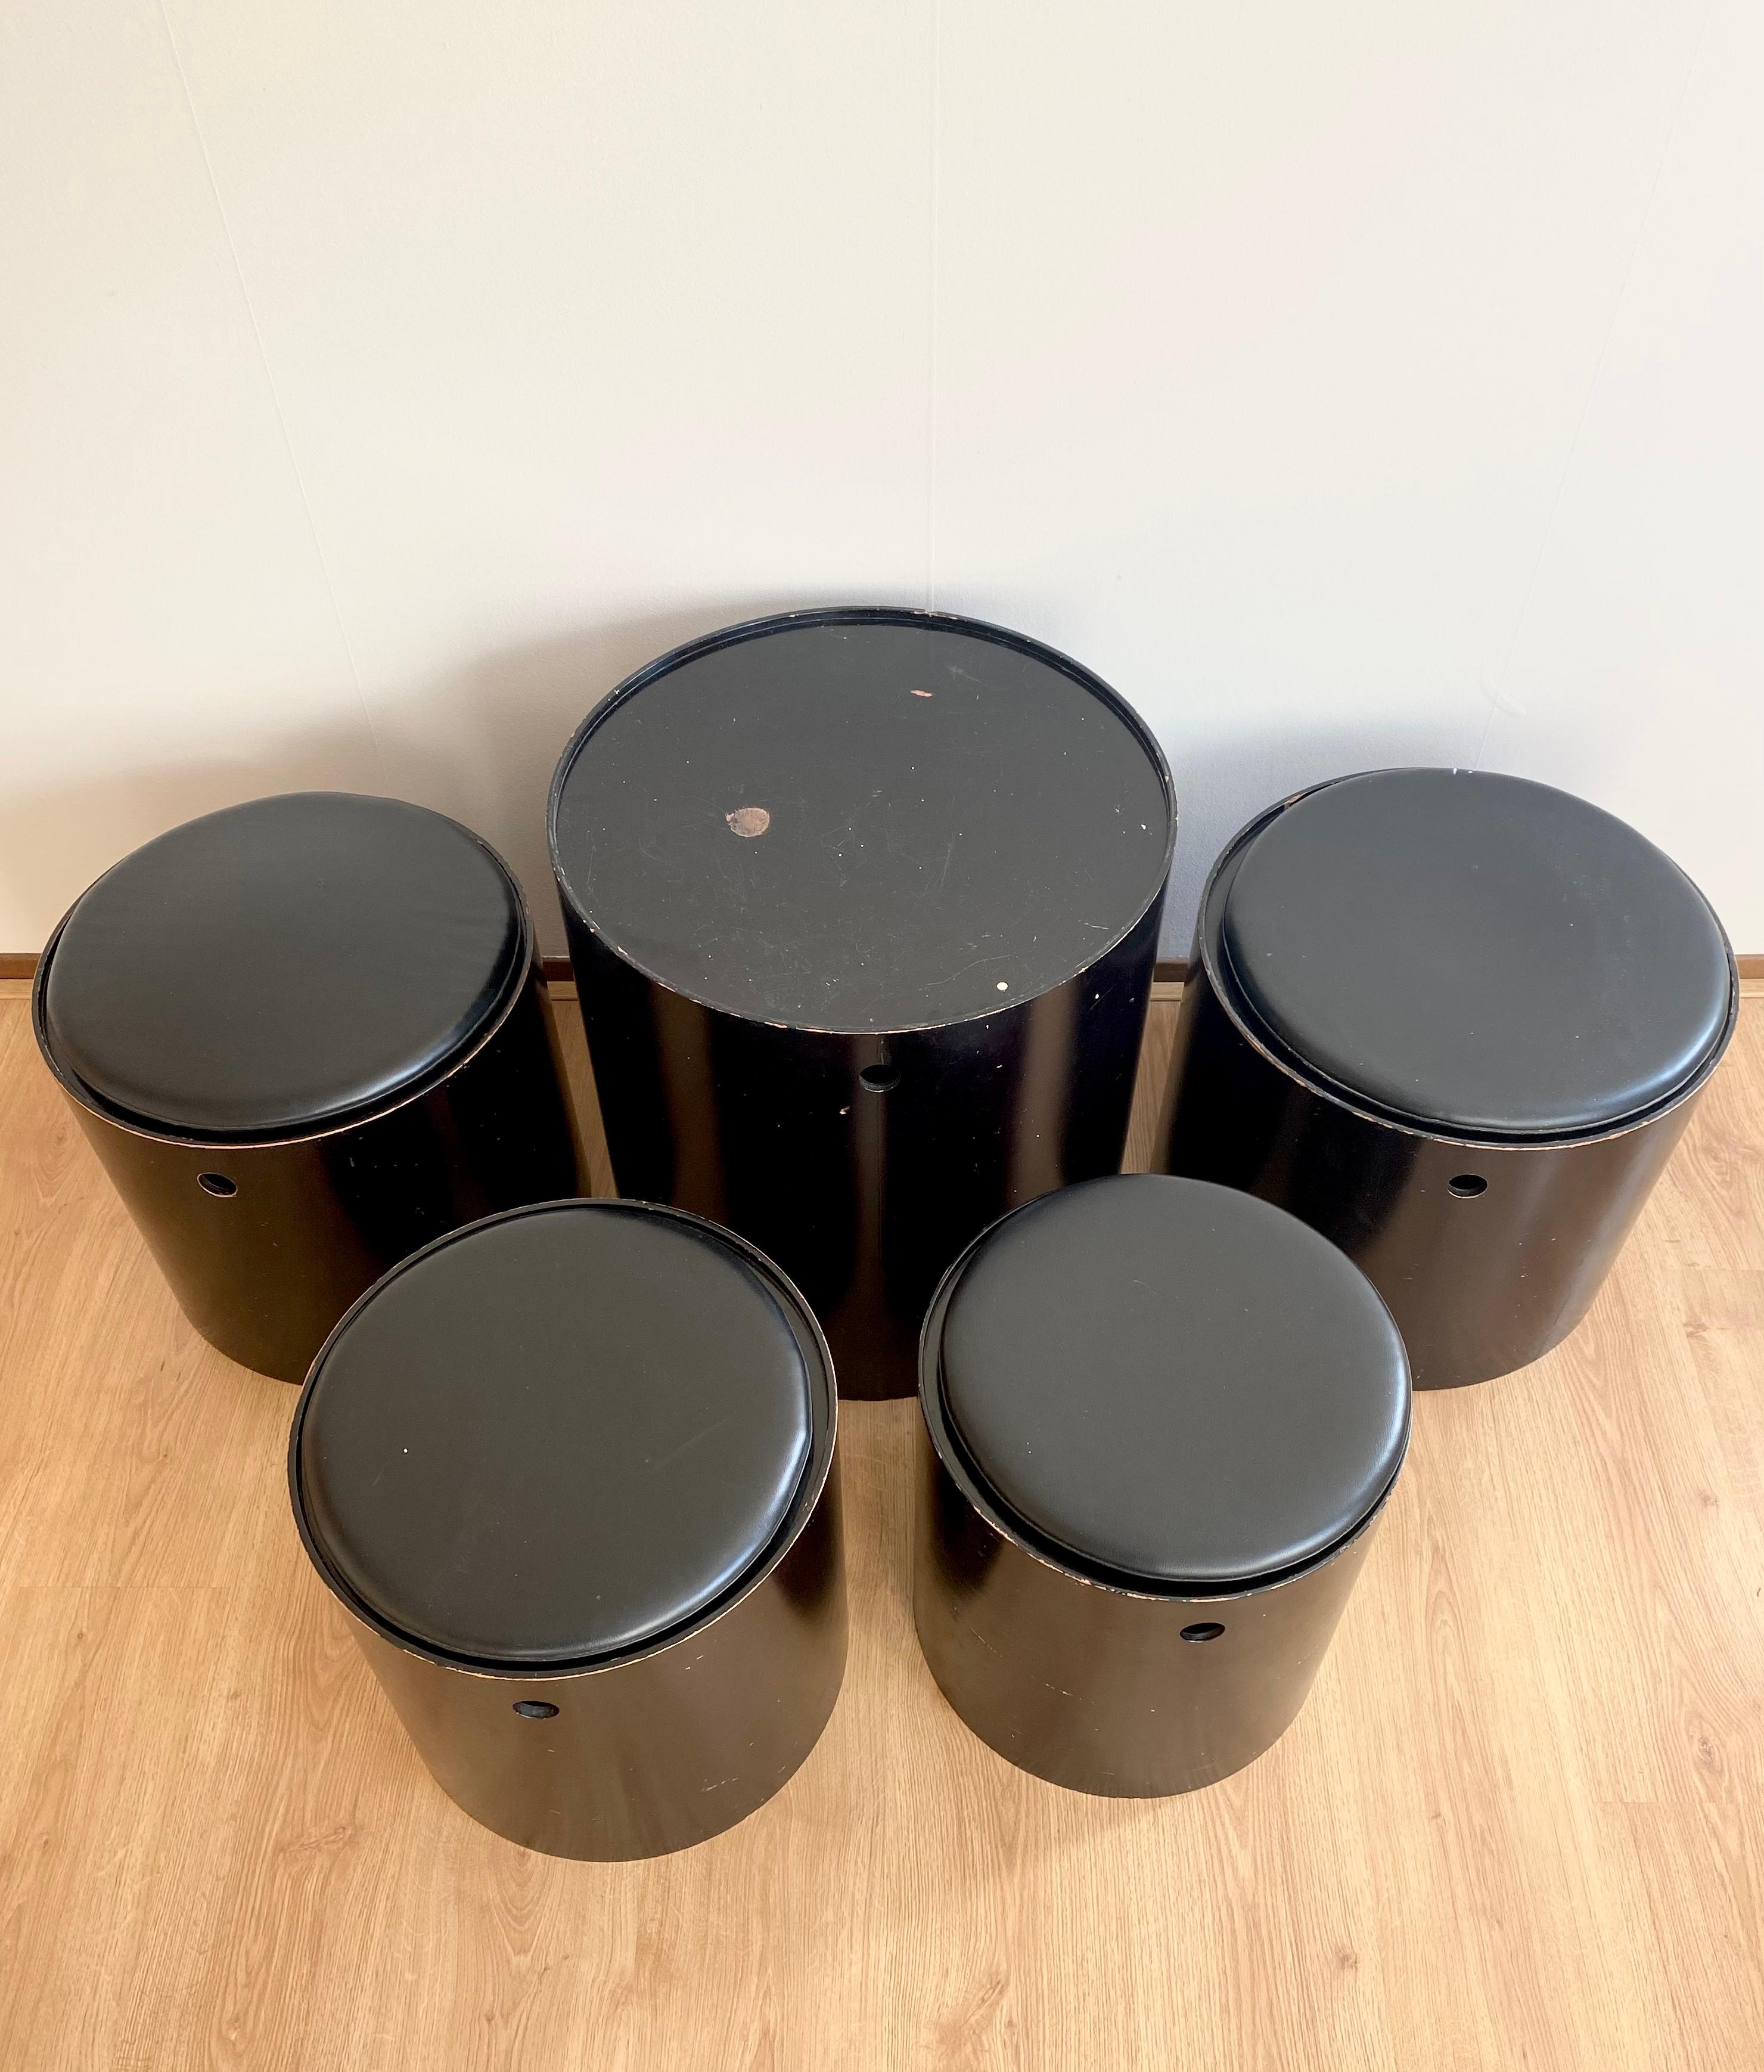 Original set consisting of four stools with Leatherette cushions and a table piece.
The seating elements were made In different sizes and were made out of bent plywood, they fit into each other. This stunning set was designed in 1965 and